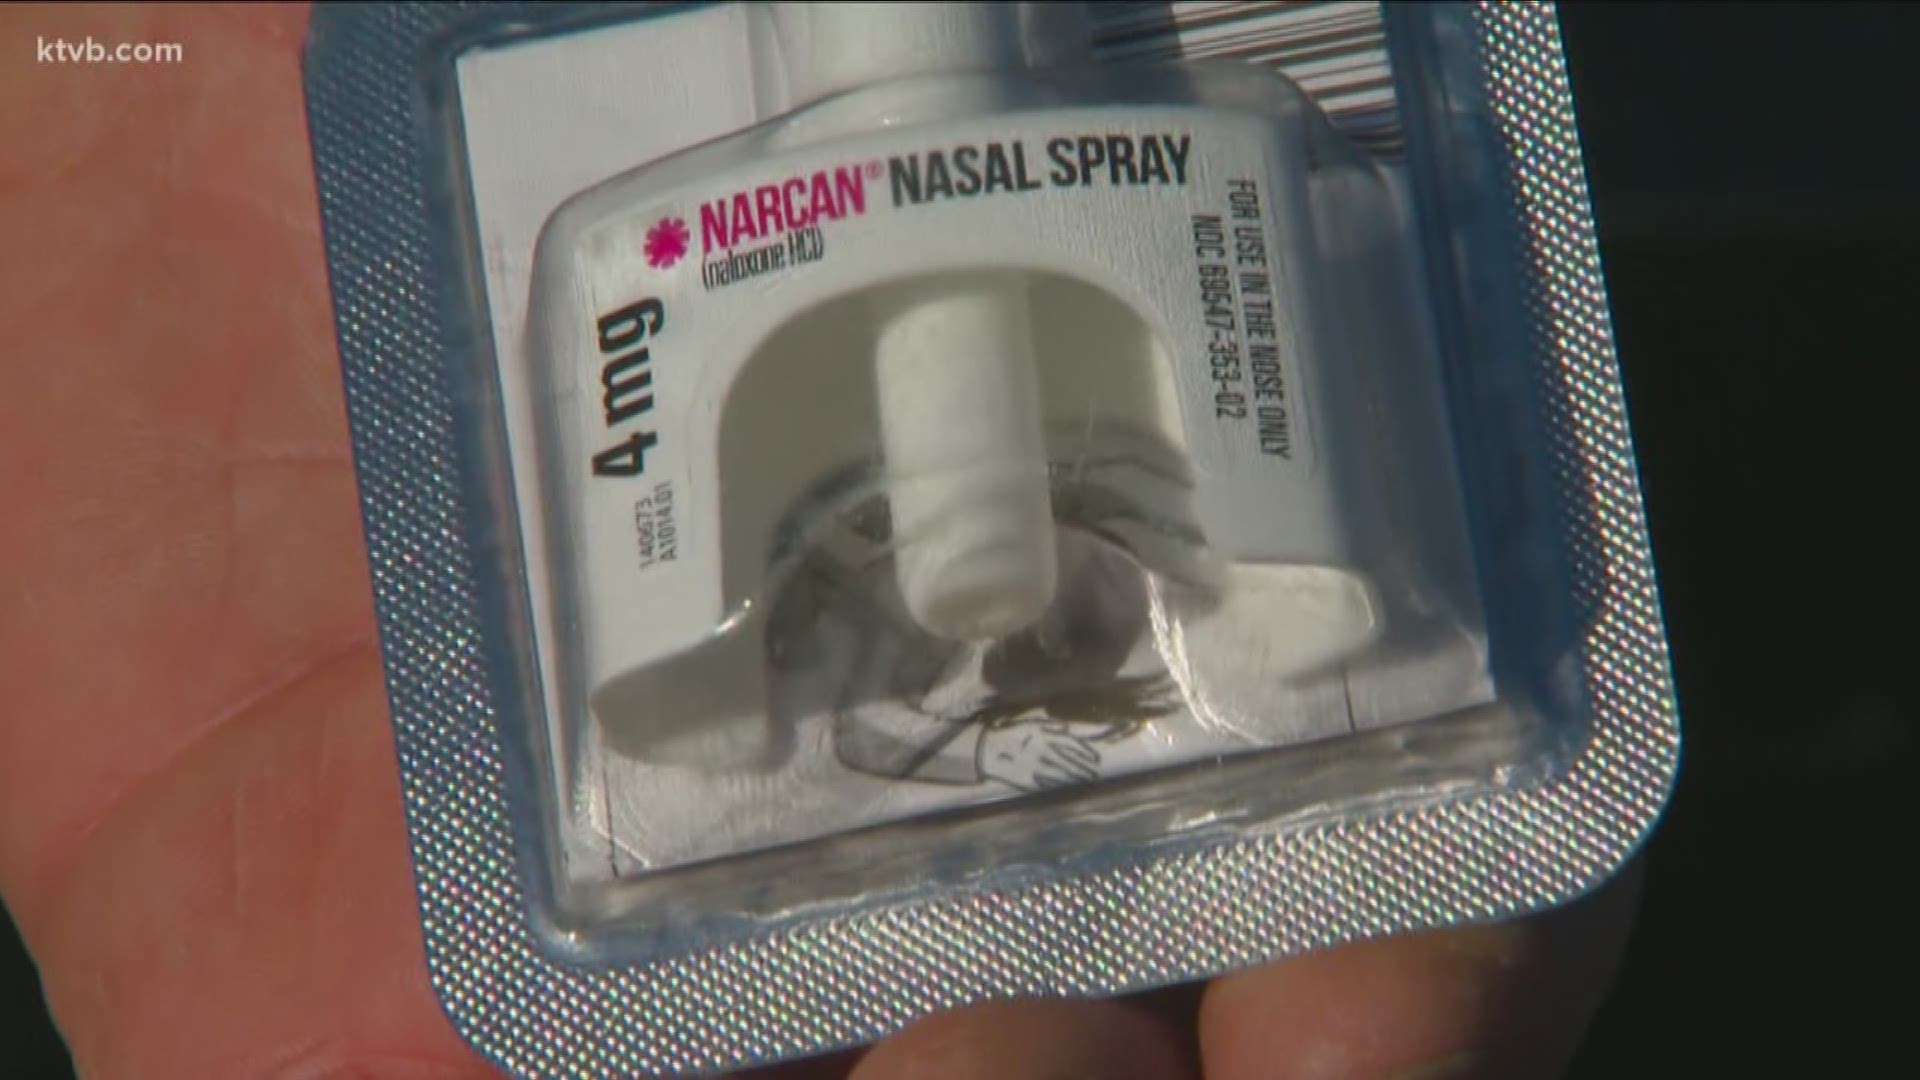 The new law is designed to help reduce the number of opioid-related deaths in Idaho.